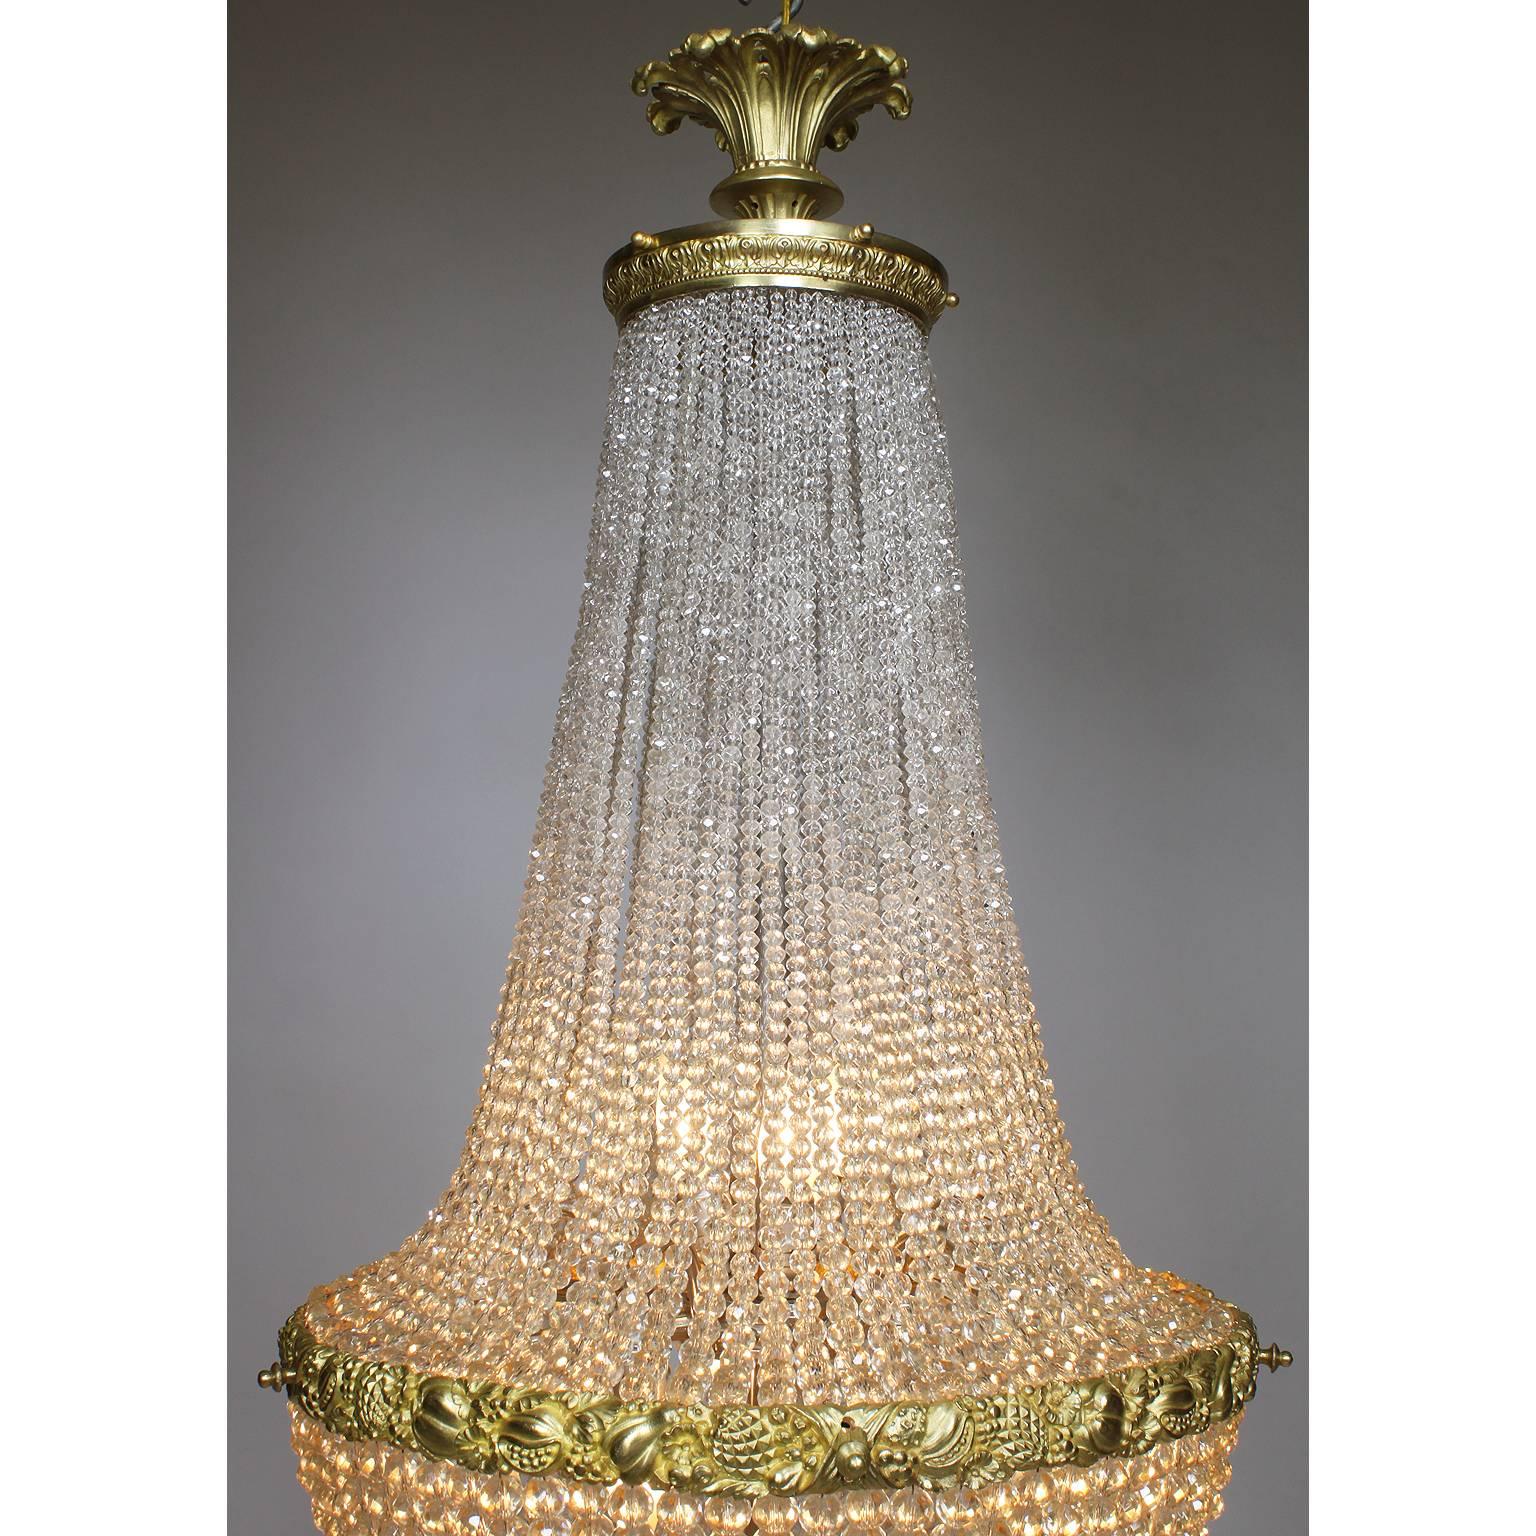 Beaded French 19th Century Louis XVI Style Gilt-Bronze and Cut-Glass Chandelier For Sale